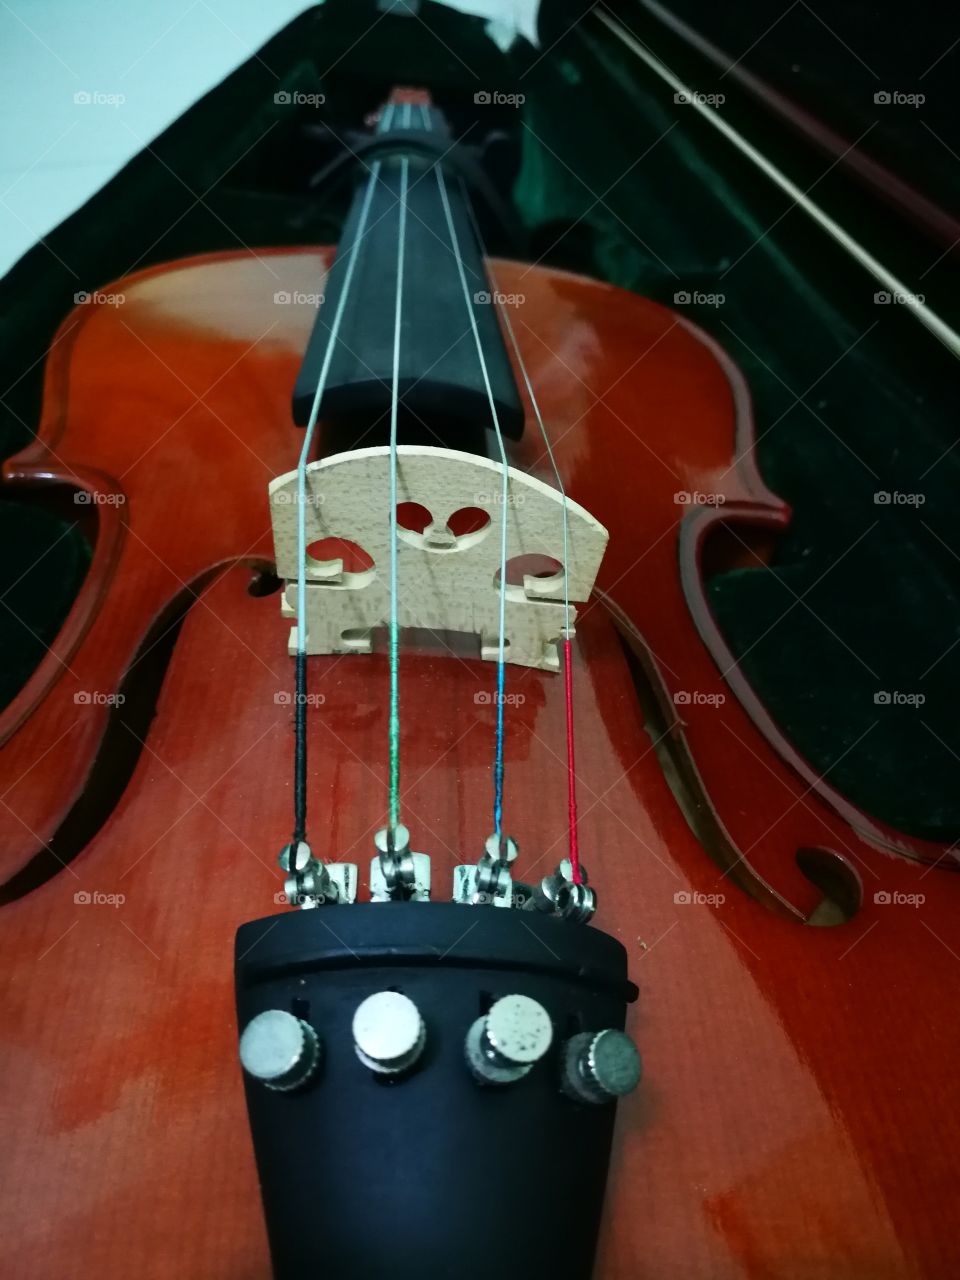 The sound of violin makes me calm and playing violin is one of my favourite.